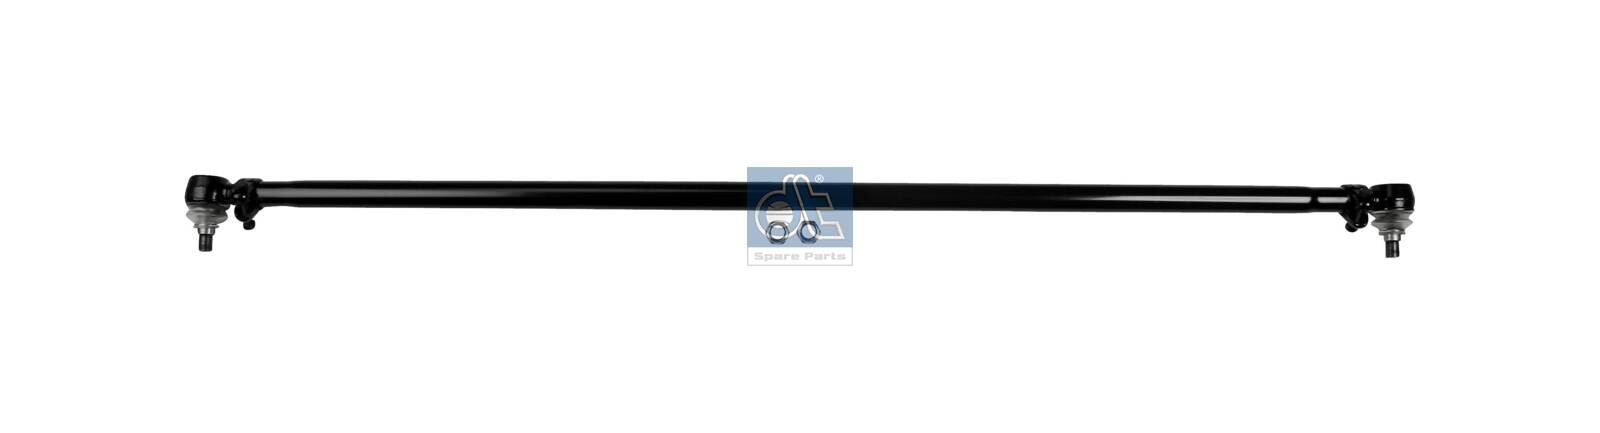 DT Spare Parts 4.64591 Rod Assembly A970 330 0403